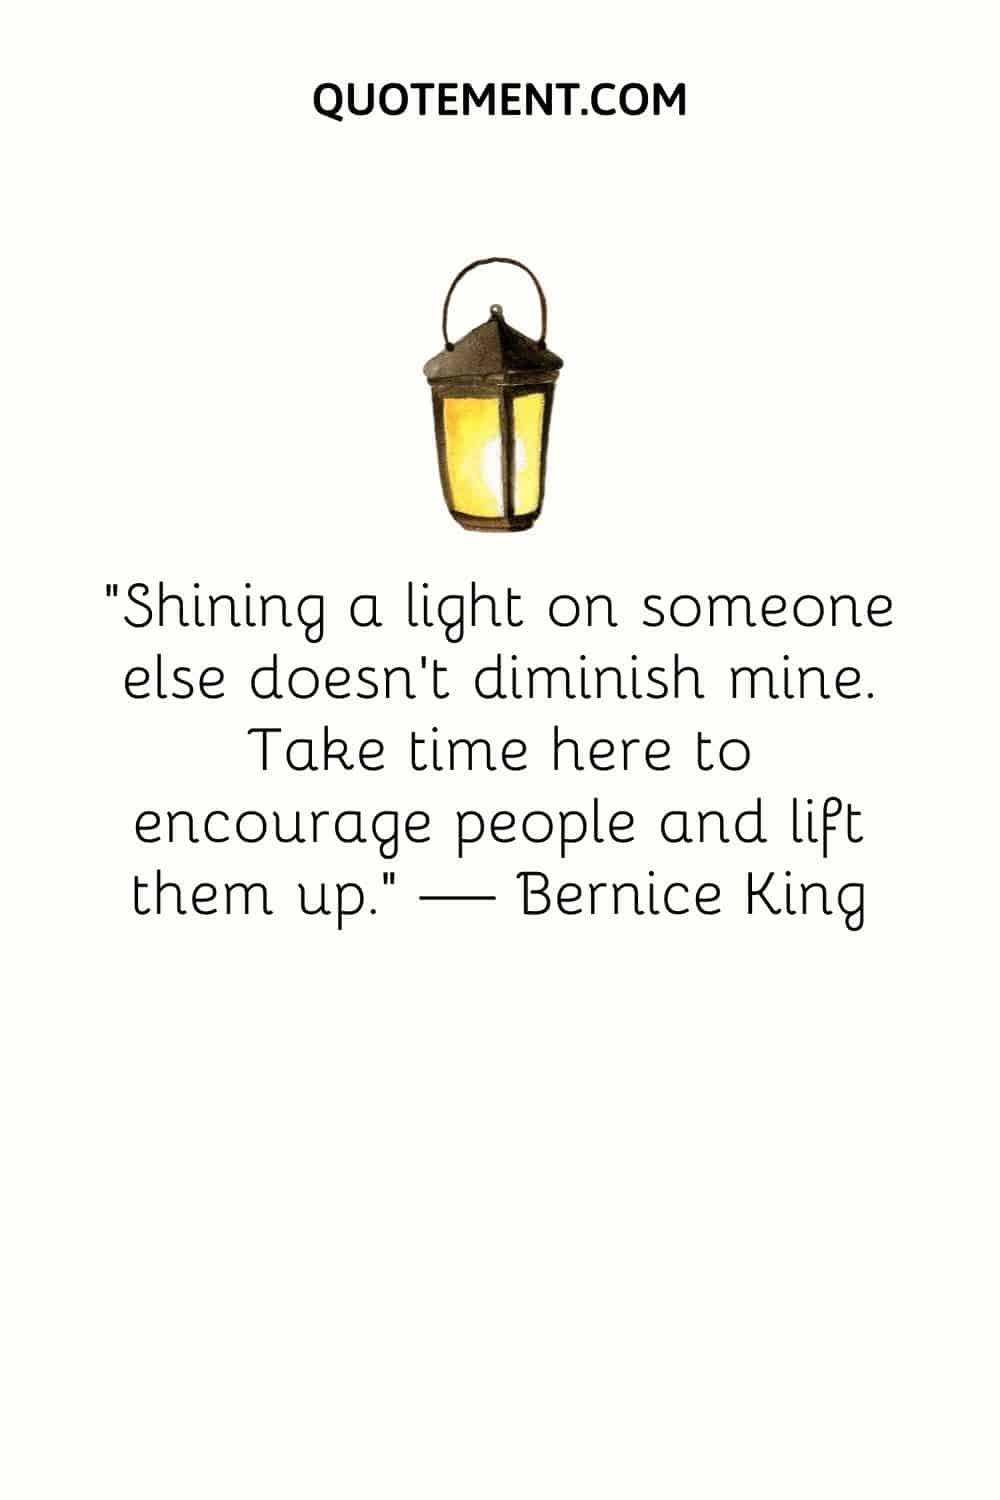 “Shining a light on someone else doesn’t diminish mine. Take time here to encourage people and lift them up.” — Bernice King